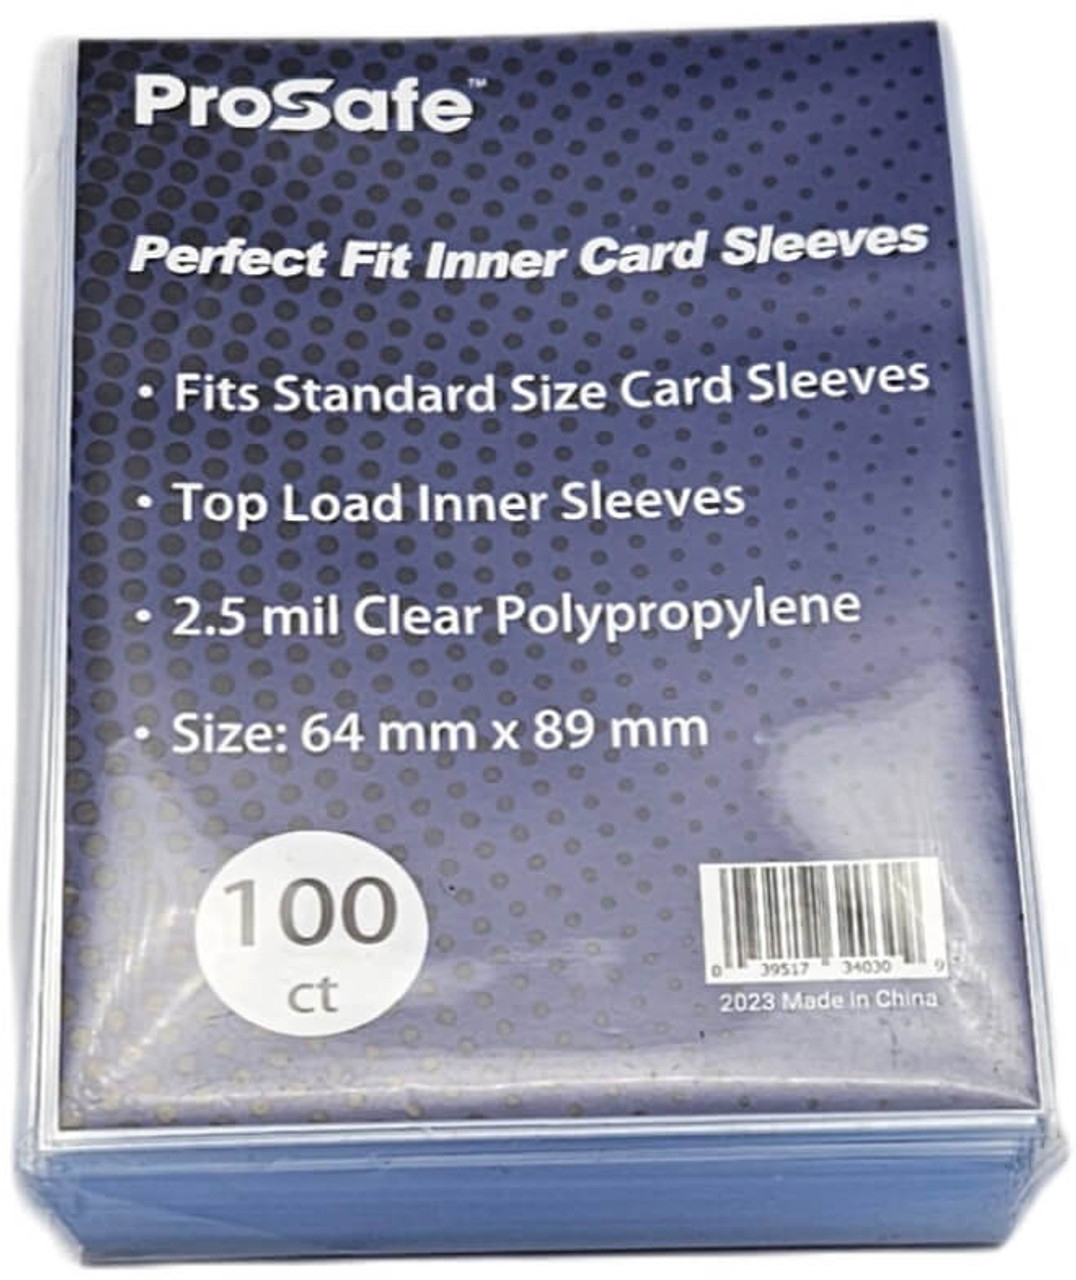 Ultra Pro: PRO-Fit Deck Protector Inner Sleeves - Standard Size Perfect Fit  Clear (100)